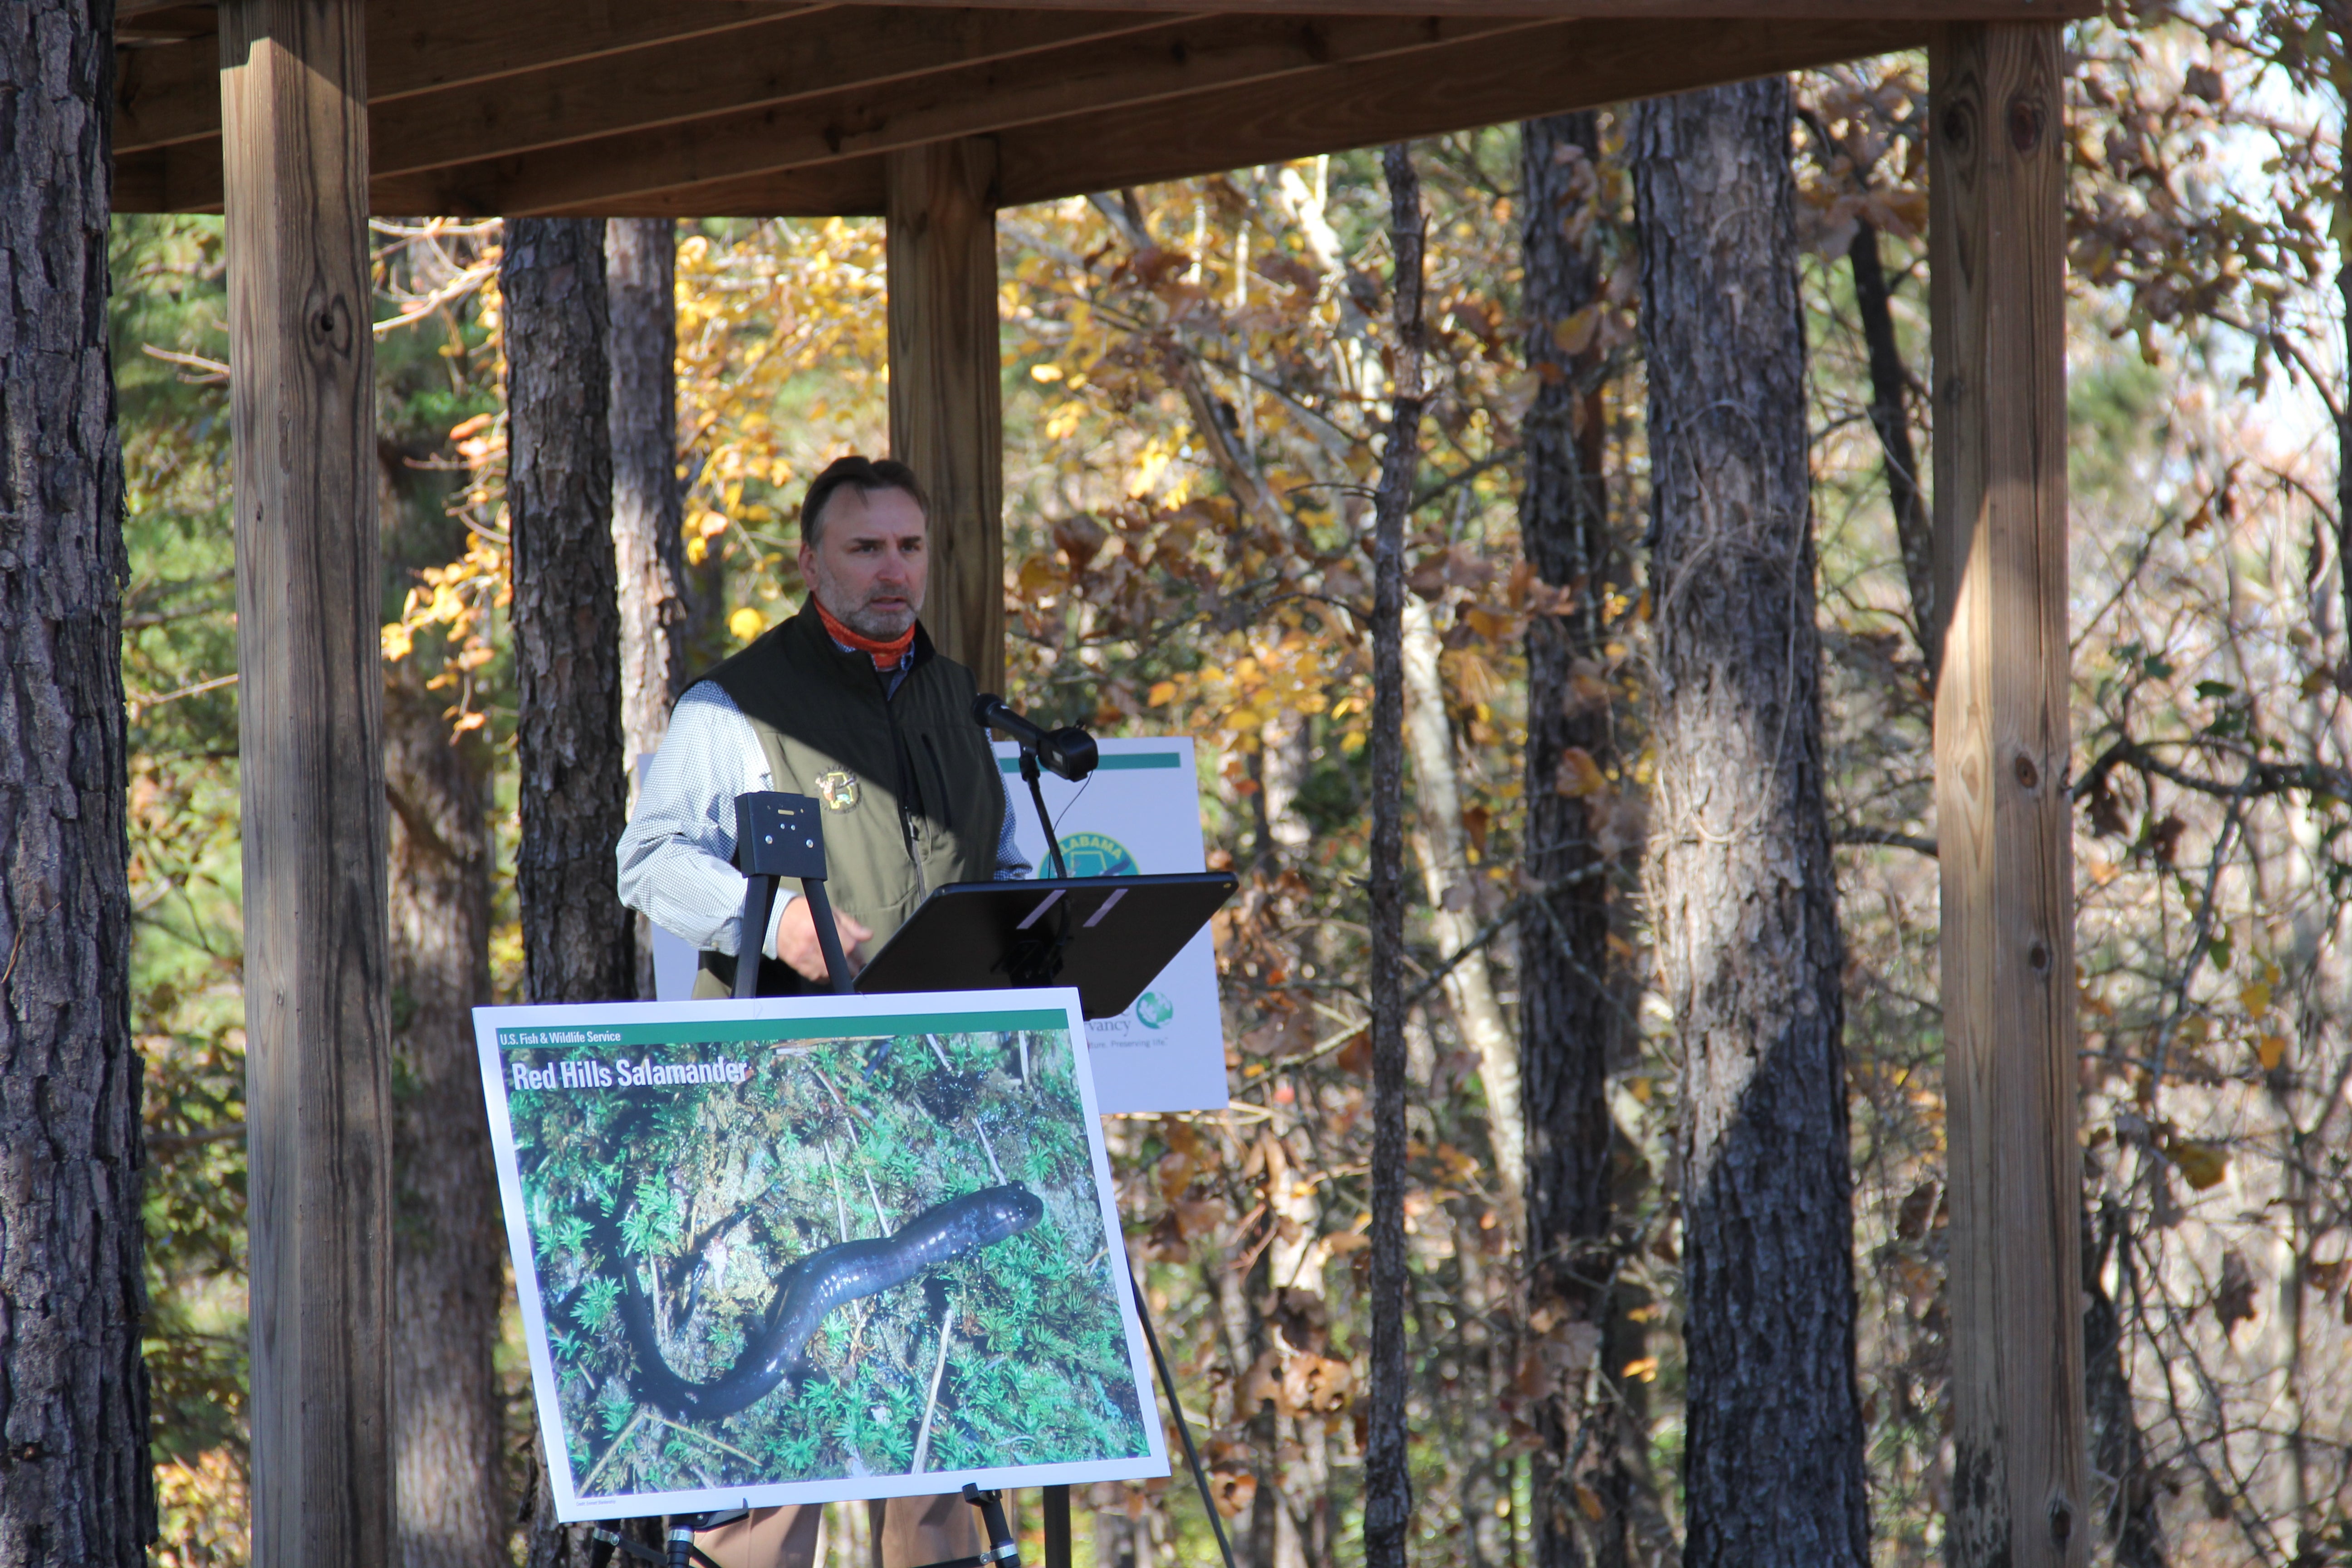 Photo: WFF Director Chuck Sykes speaks at an event celebrating the acquisition of additional critical Red Hills salamander habitat in 2020. Director Sykes, along with the ADCNR's Red Hills Salamander Habitat Purchase Team, were recently honored with a USFWS Regional Director’s Award for their work to conserve Red Hills salamander habitat in Monroe County, Alabama. Photo by Kenny Johnson, ADCNR